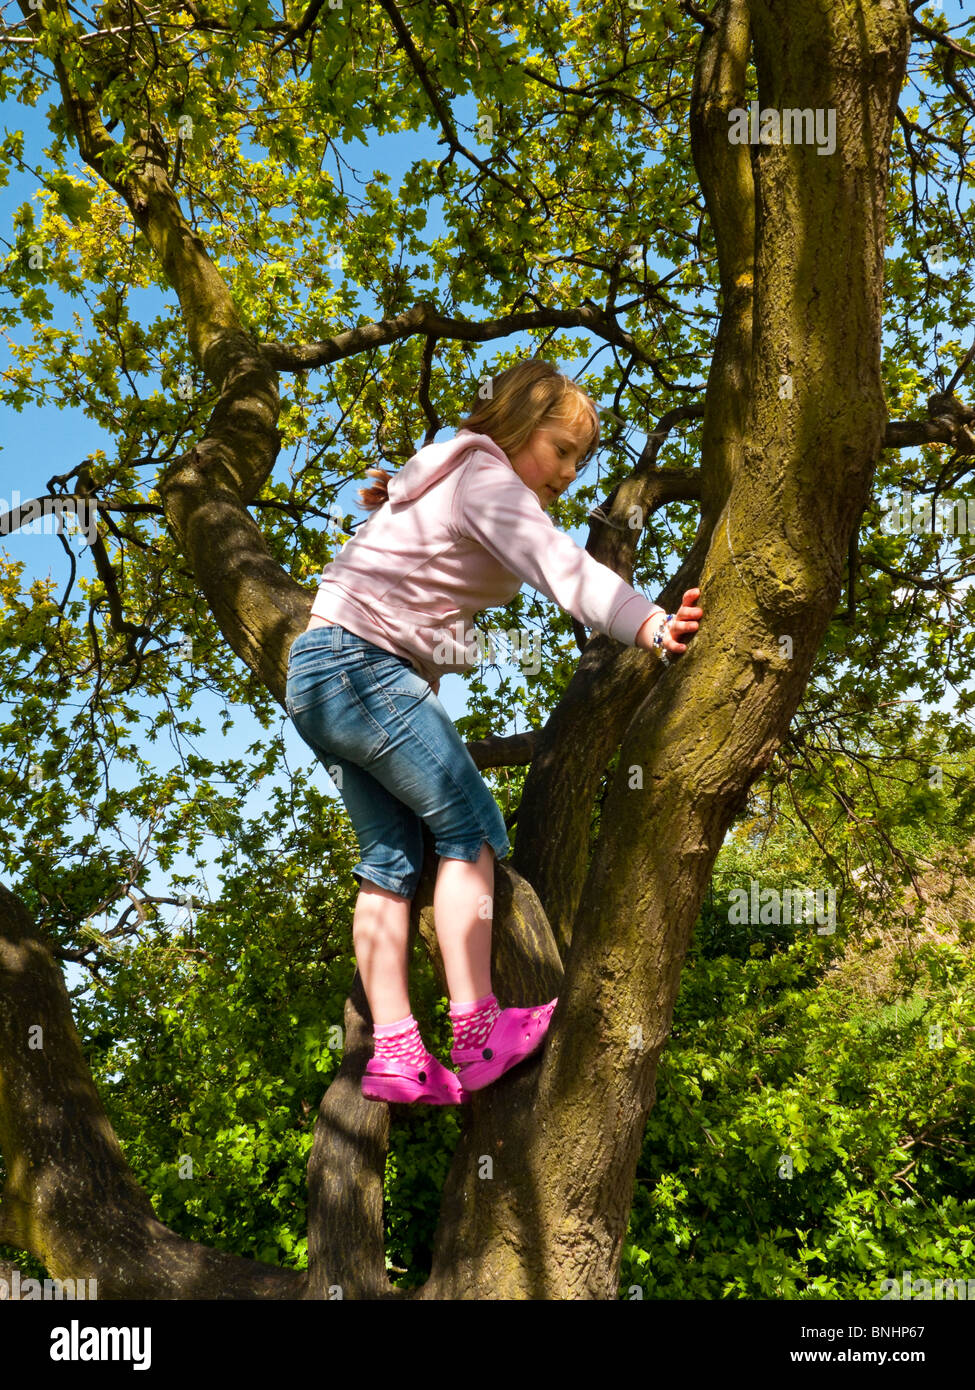 Eight year old blonde girl climbing a tree wearing blue jeans and a pink fleece top Stock Photo